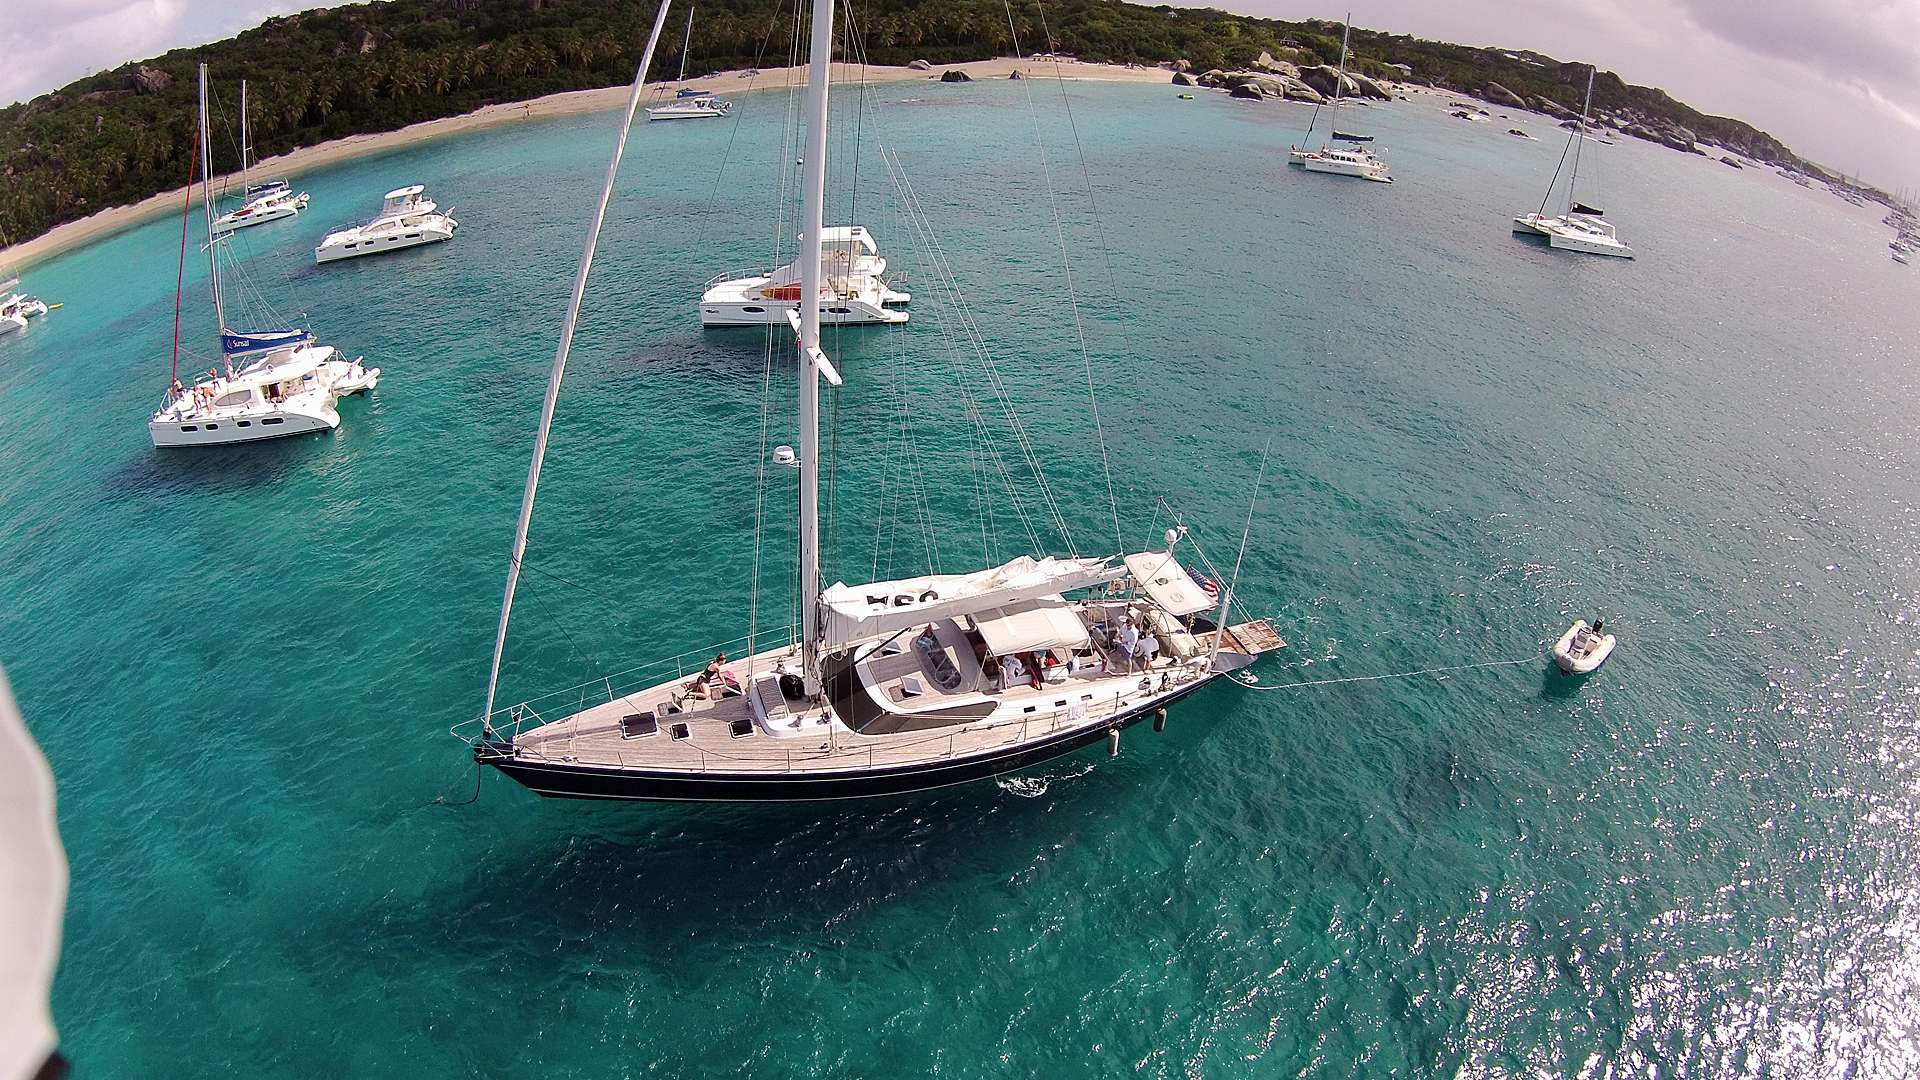 Sailing Yacht 'CAP II' Aerial View, 6 PAX, 2 Crew, 76.00 Ft, 23.00 Meters, Built 1992, CNB Bordeaux, Refit Year Main engine rebuild 2014; All of the following new in 2014/2015: standing rigging, B&G wind instruments, radar & chart-plotter, mainsai